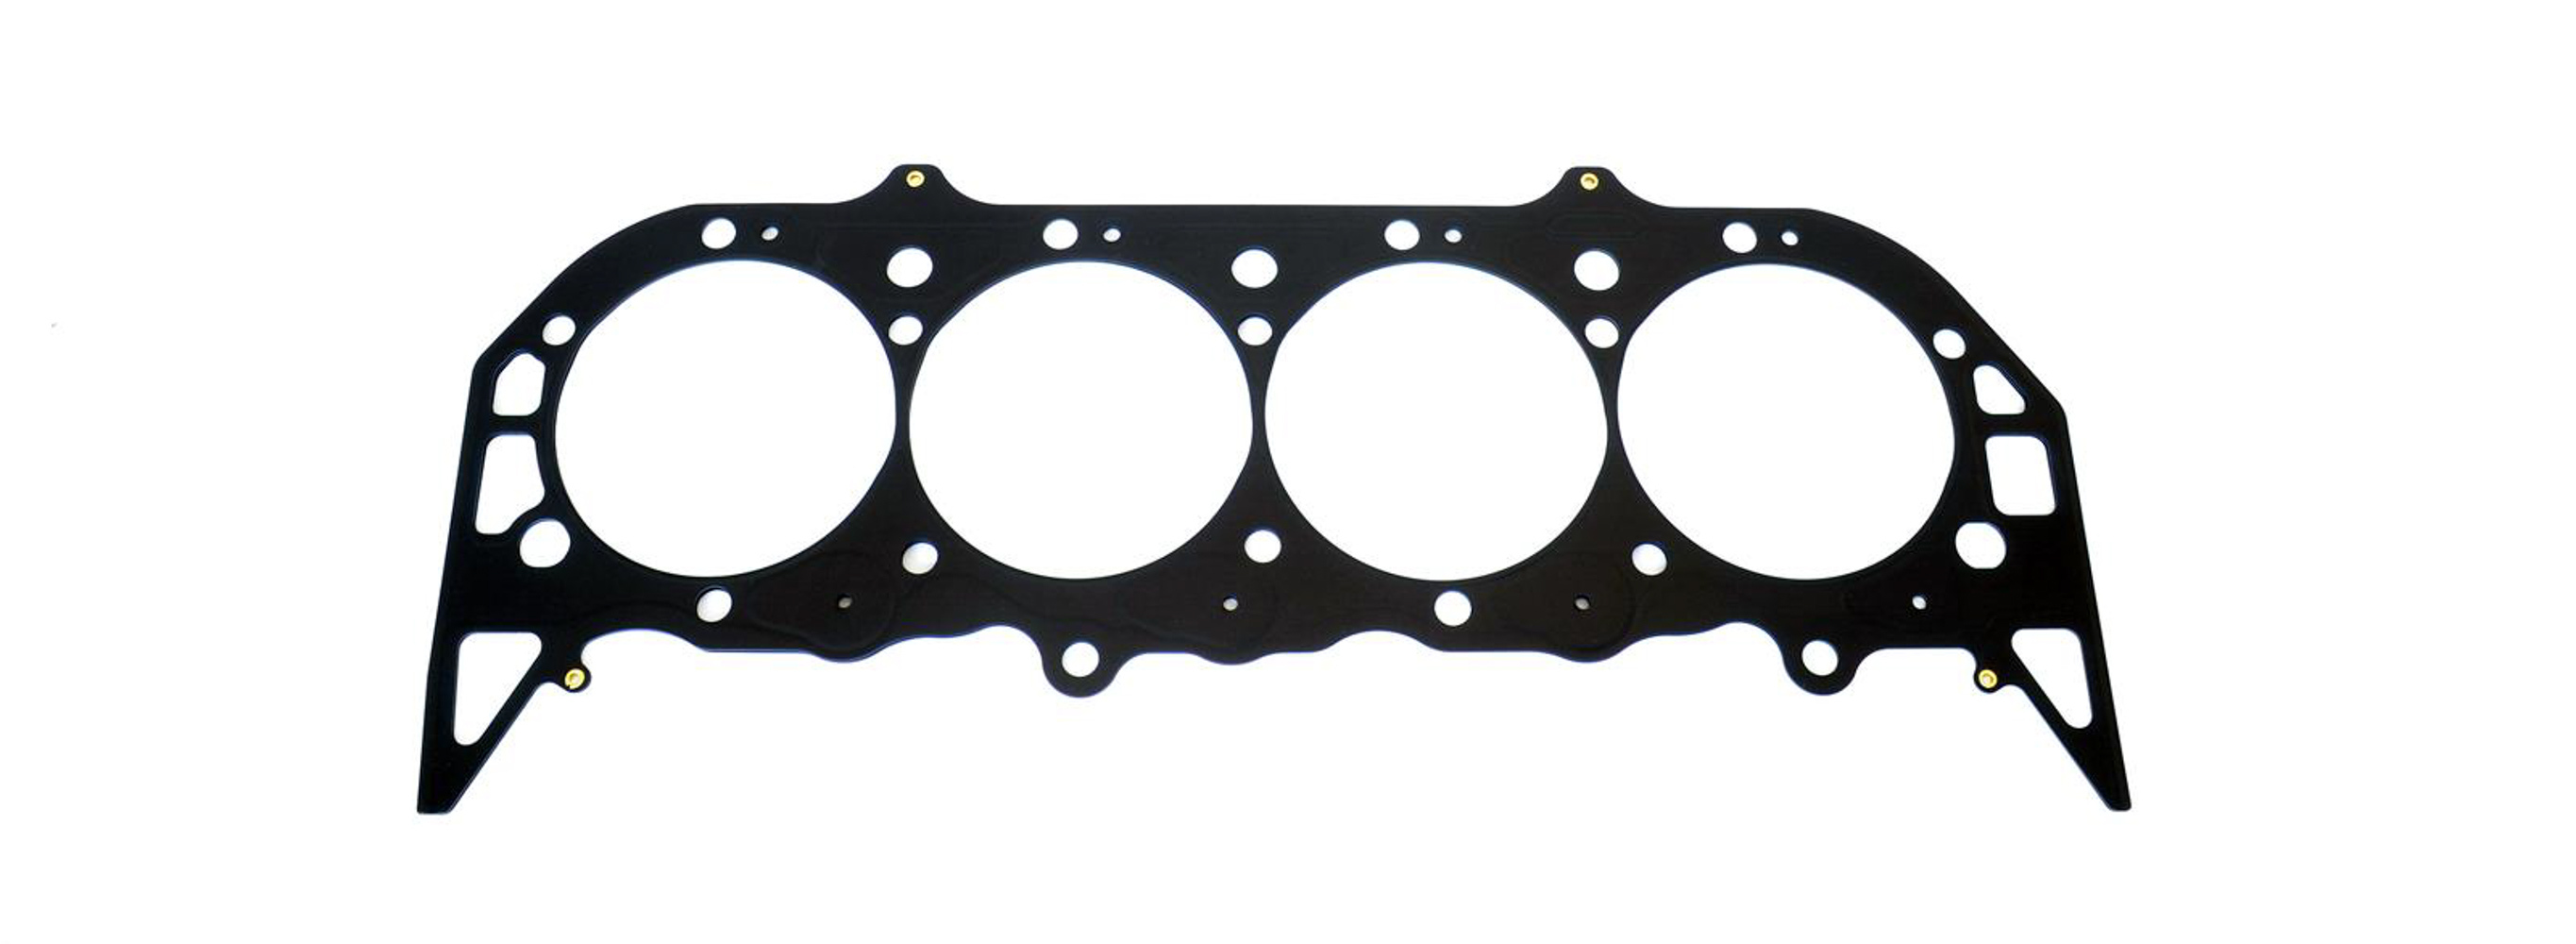 SCE Gaskets M136345 - Cylinder Head Gasket, MLS Spartan, 4.630 in Bore, 0.045 in Compression Thickness, Multi-Layer Steel, Big Block Chevy, Each